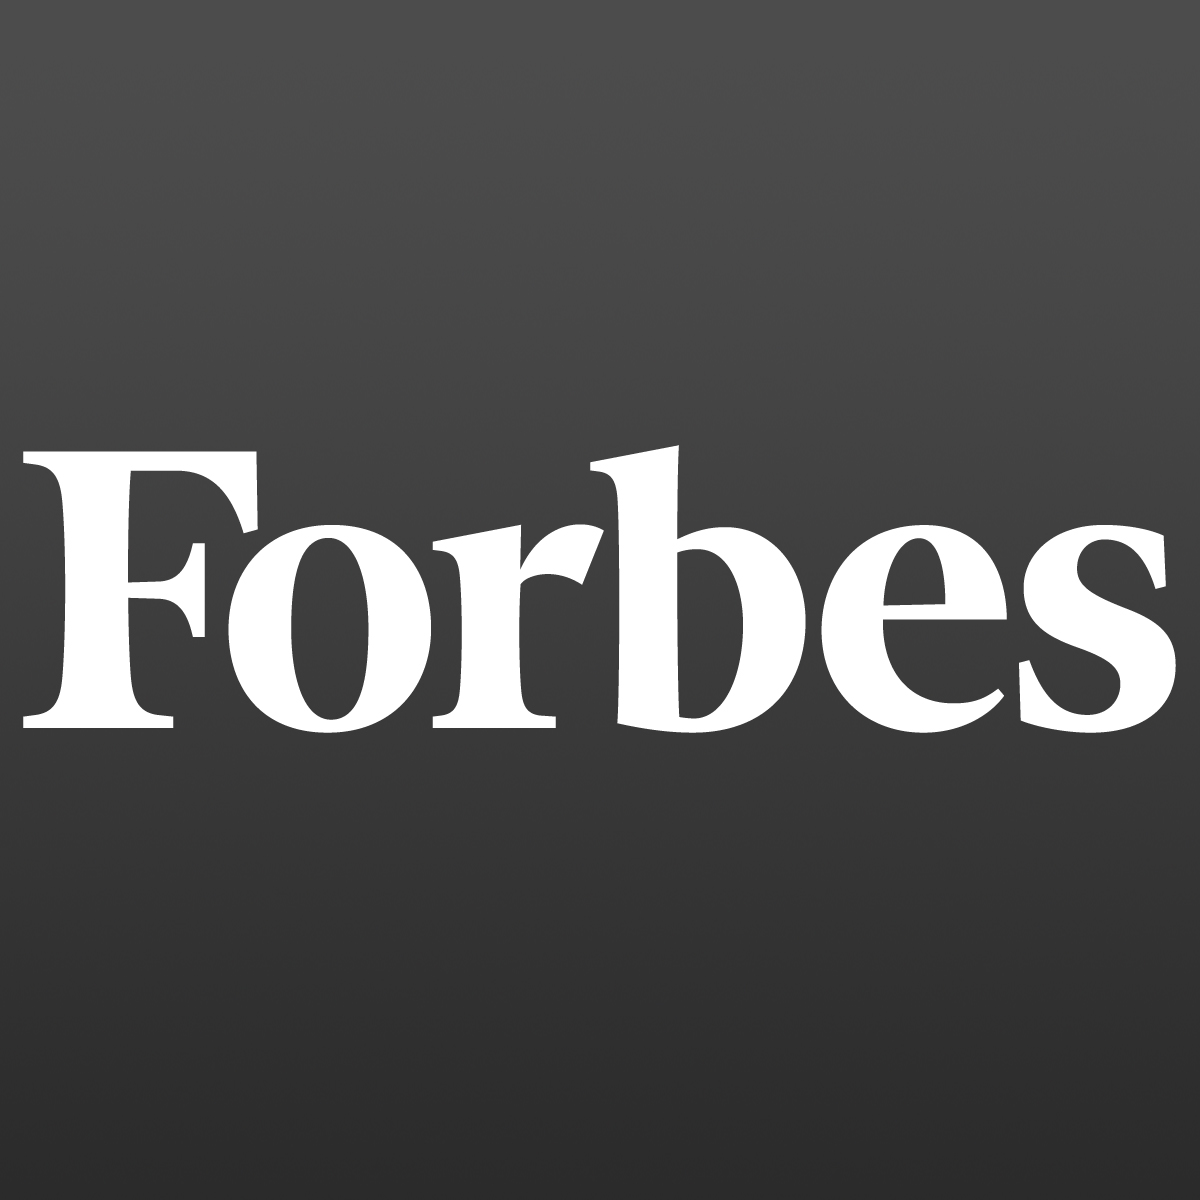 Here is Forbes 23 Quotes by Top Execs About Bitcoin (BTC) and Blockchain that You Should Read